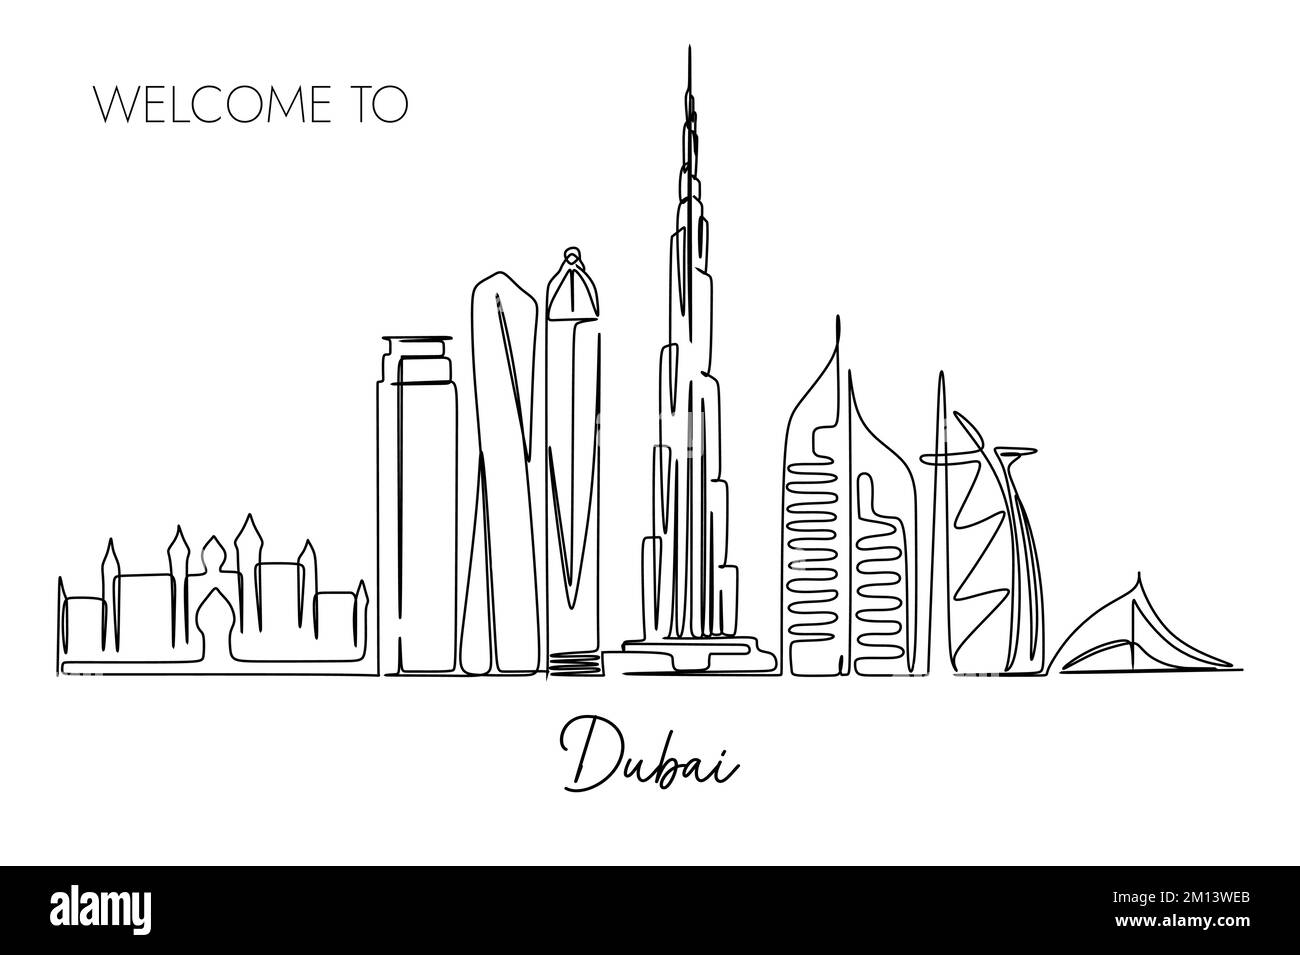 one continuous line drawing of Dubai city skyline. World Famous tourism destination. Simple hand drawn style design for travel and tourism promotion Stock Vector